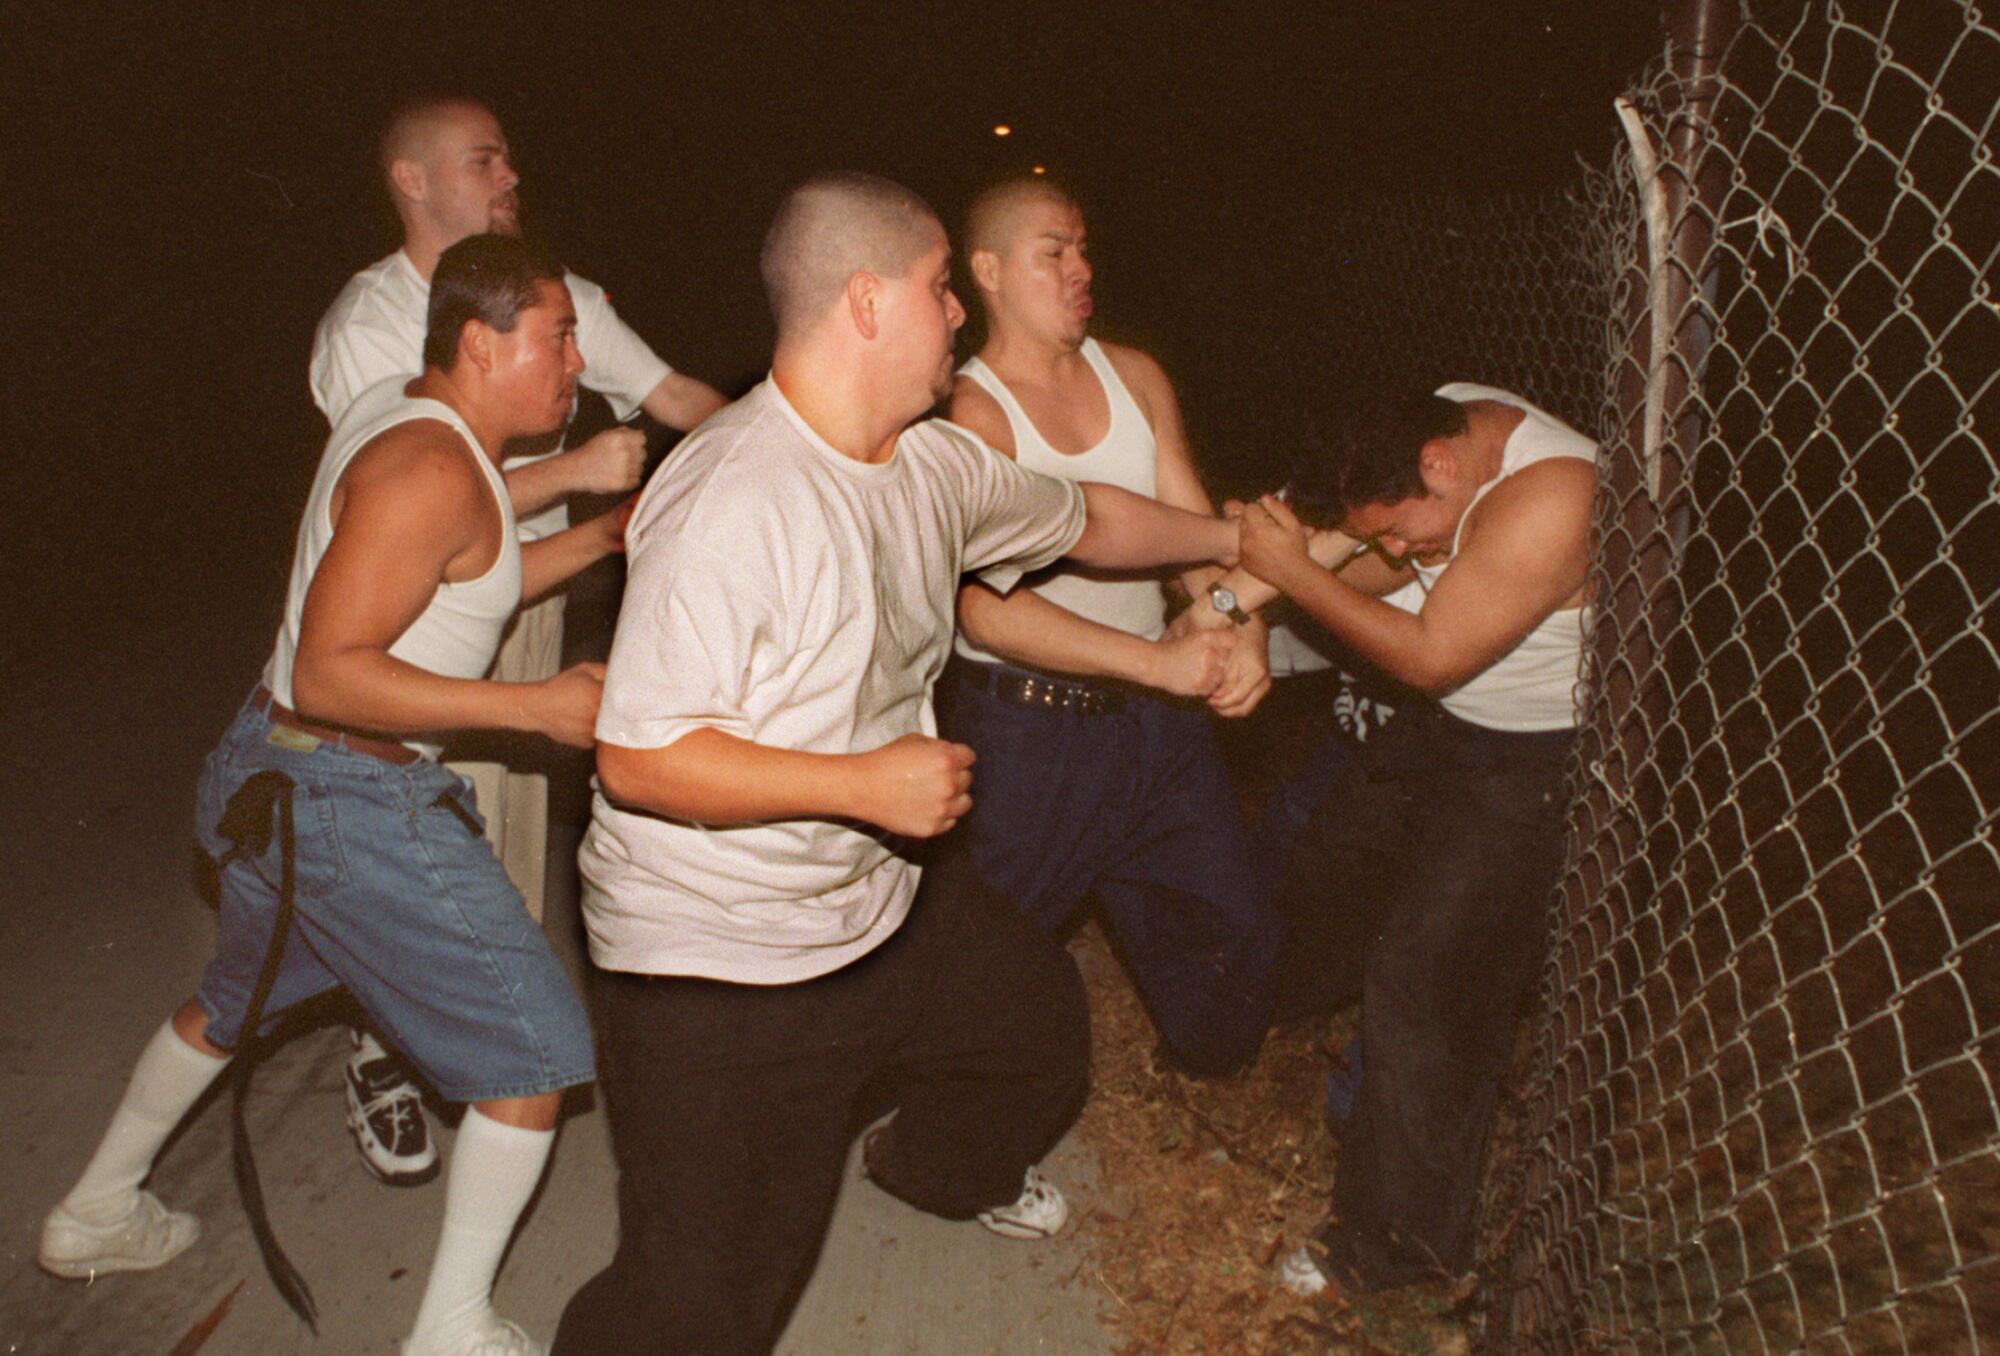 Four men in buzz cuts throw punches at a fifth, pinned against a chain link fence.